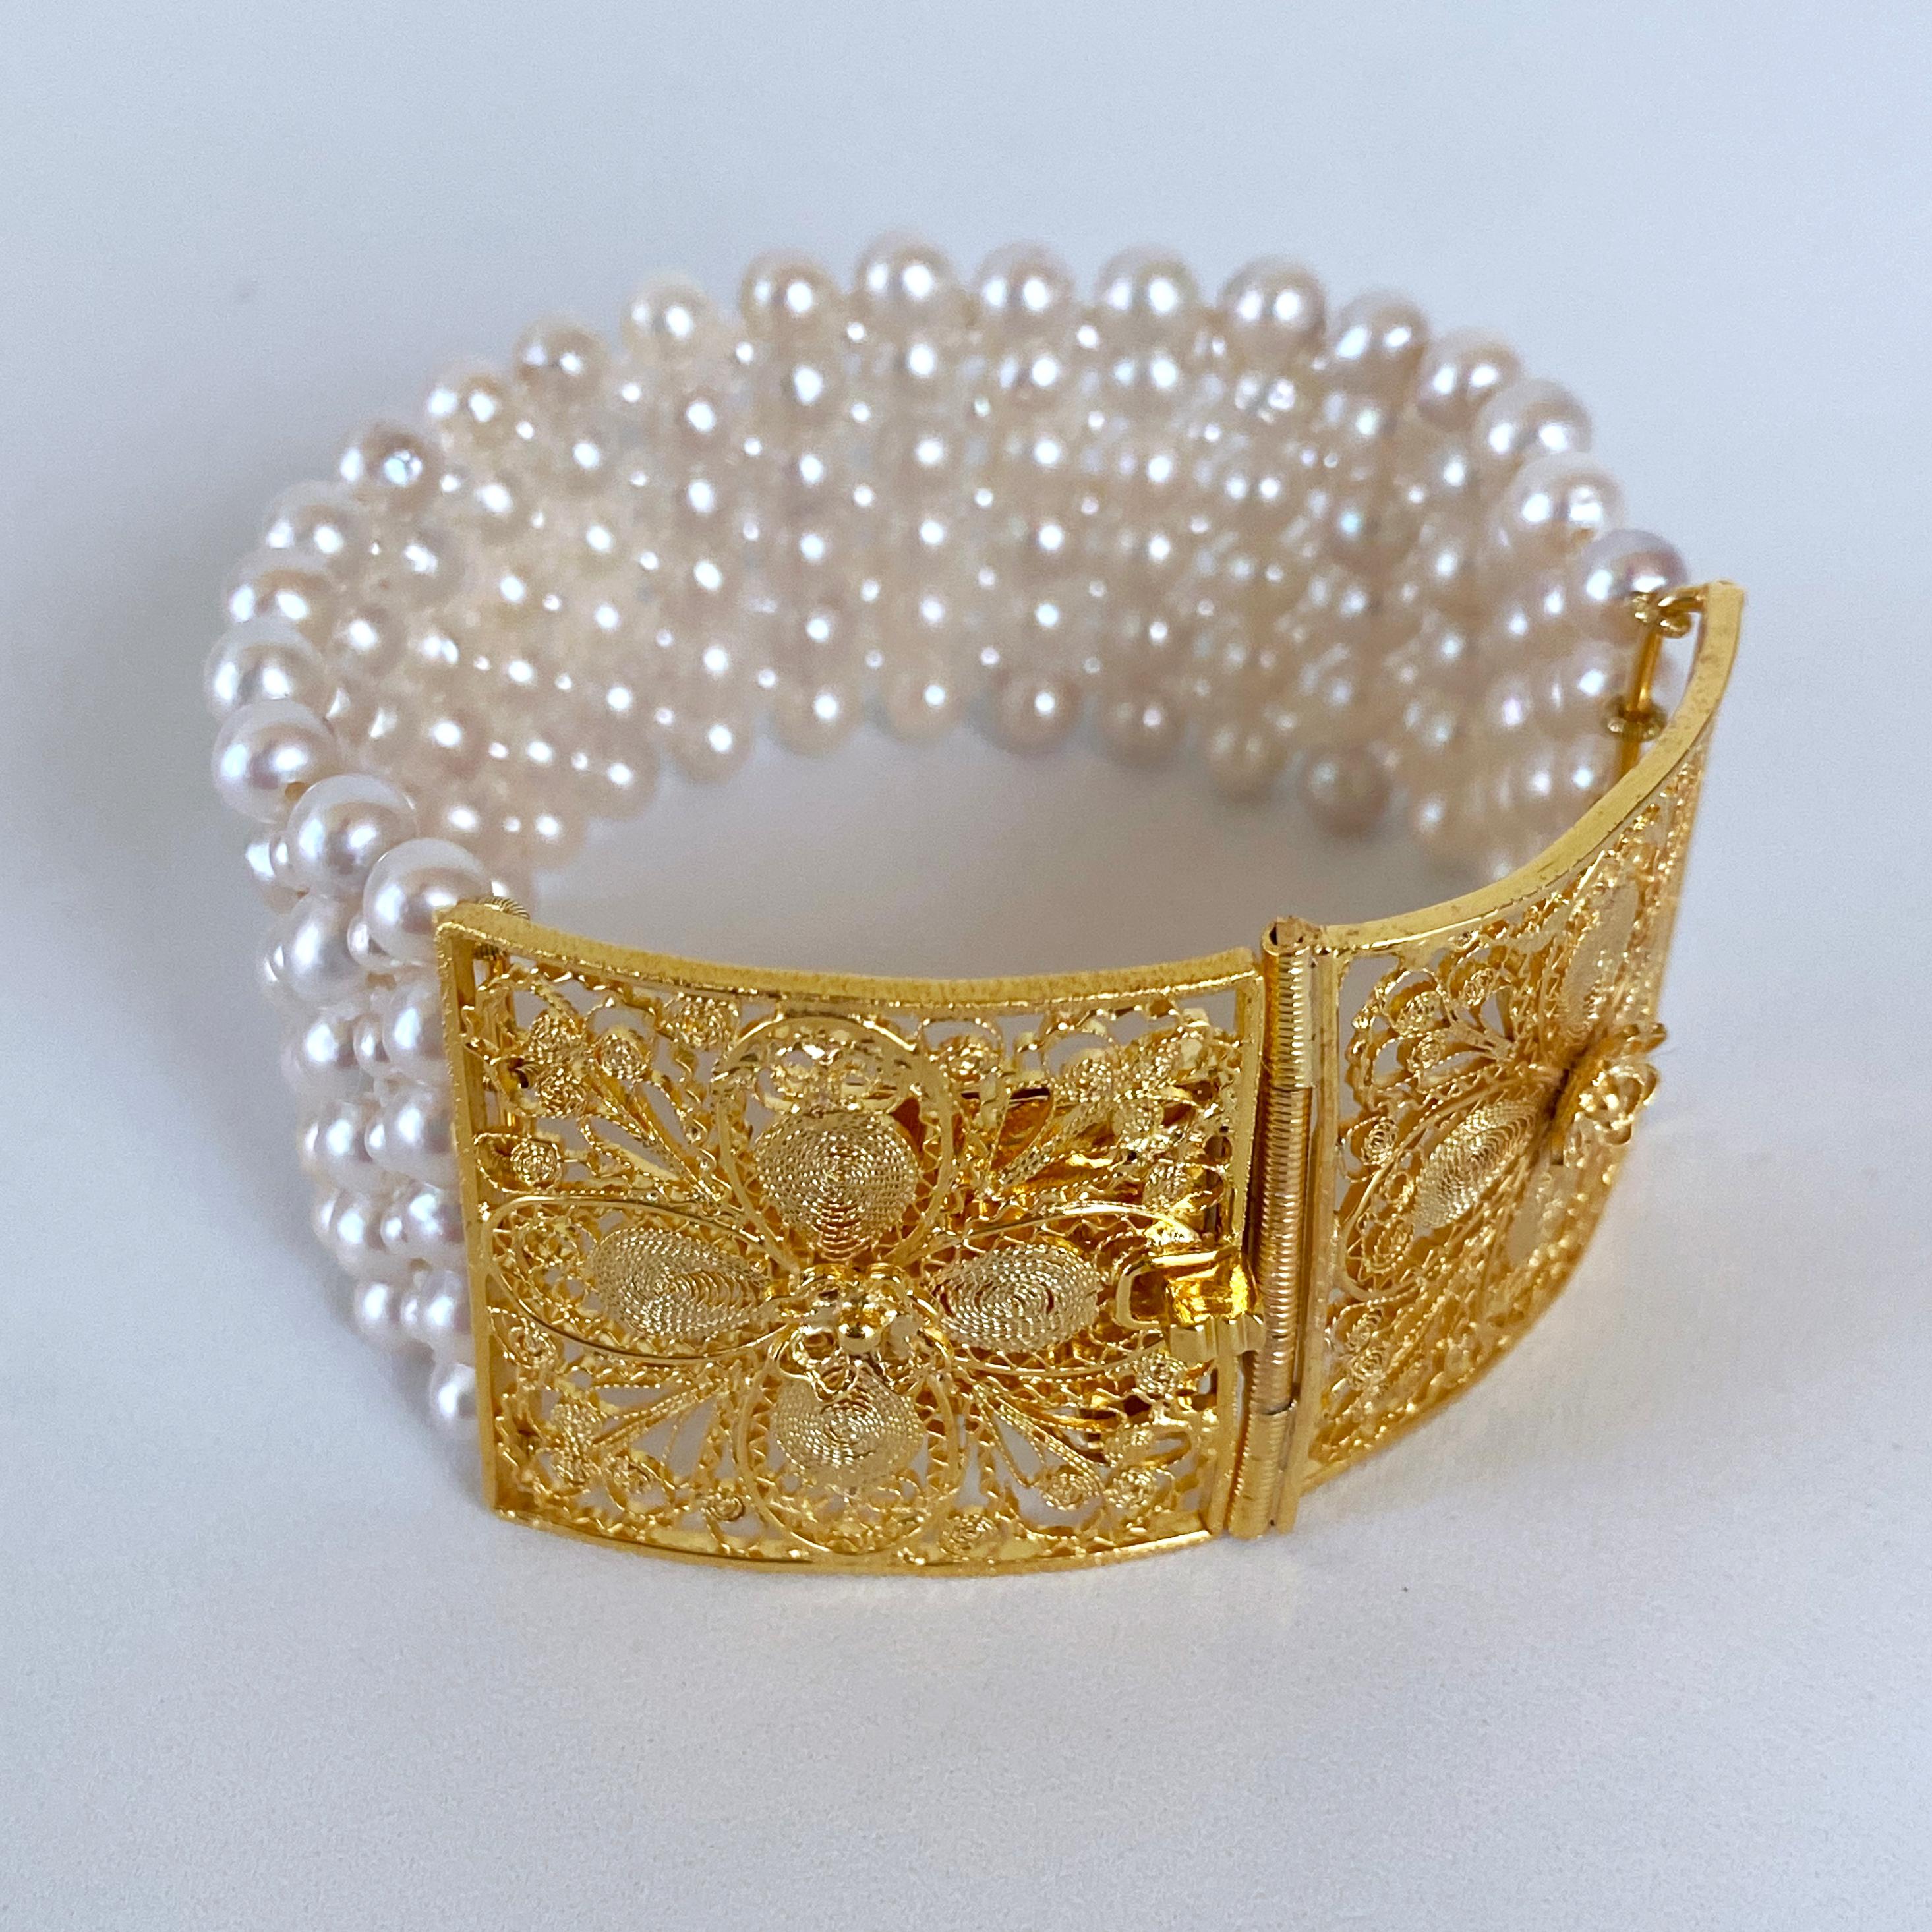 Bold One of A Kind Bracelet by Marina J. This piece features a Vintage Clasp, plated in 18k Yellow Gold, displaying beautiful Floral Filigree detailings. The Clasp is made of two segments that come together to become a vivid Centerpiece. Measuring